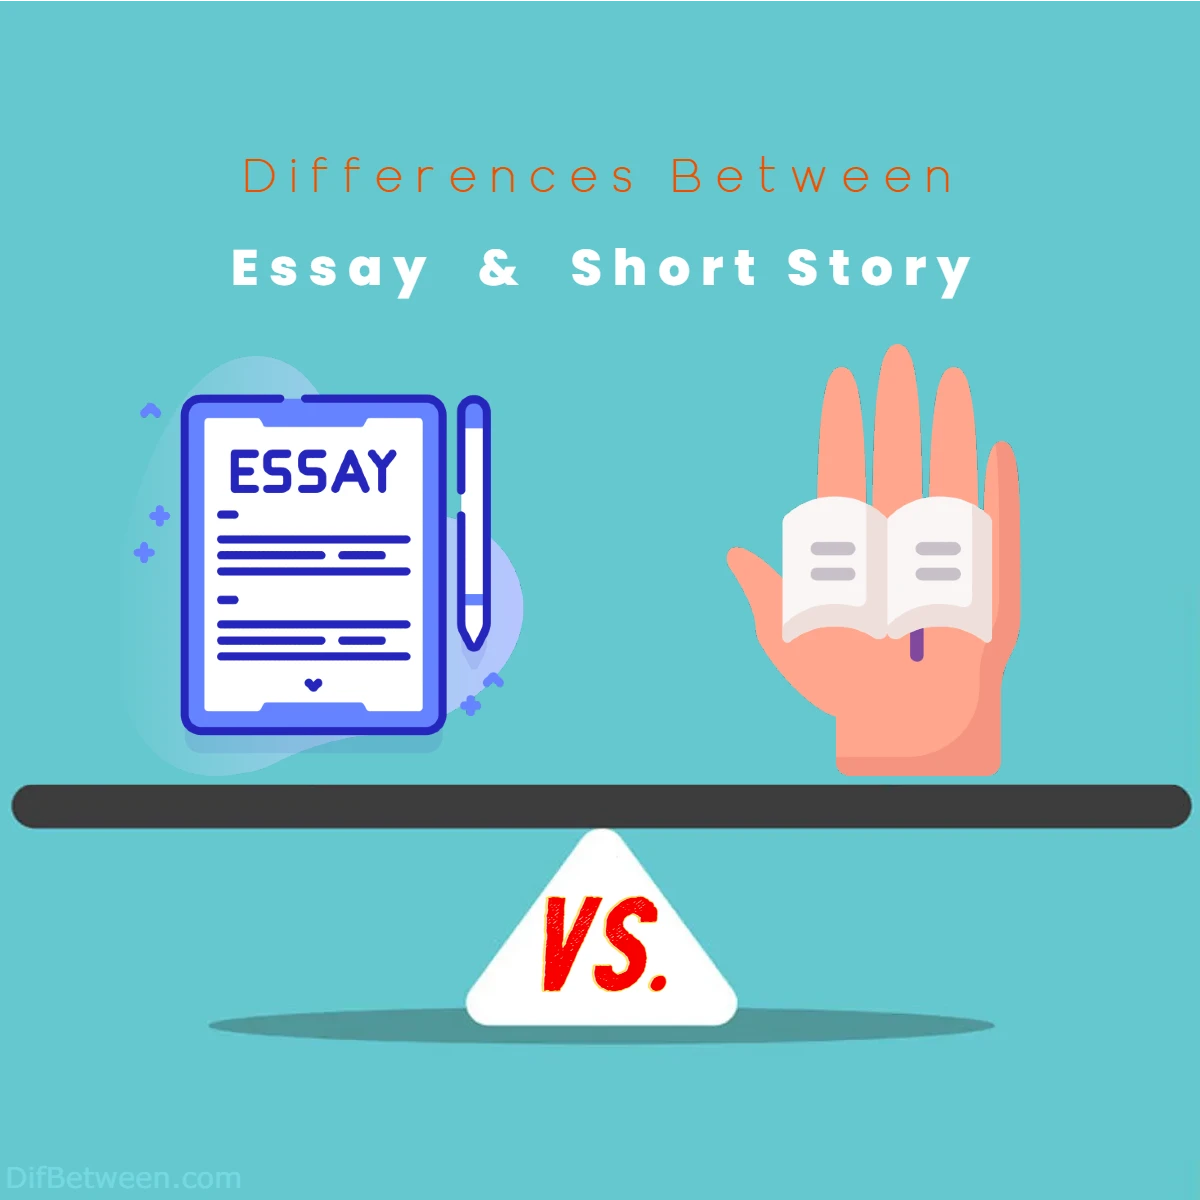 Differences Between Essay vs Short Story